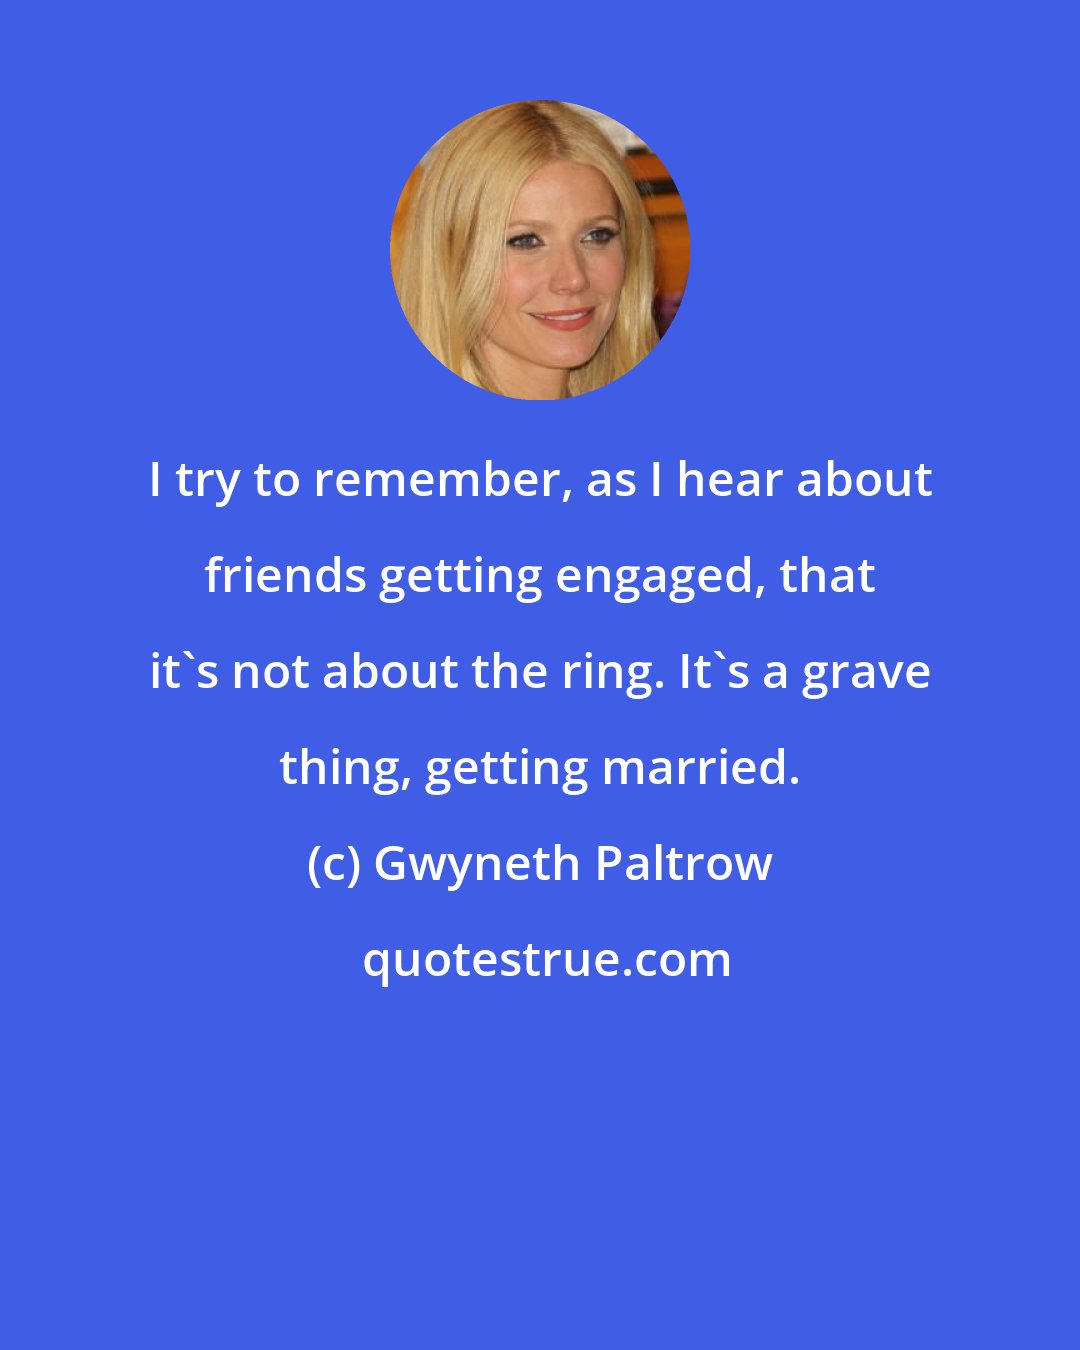 Gwyneth Paltrow: I try to remember, as I hear about friends getting engaged, that it's not about the ring. It's a grave thing, getting married.